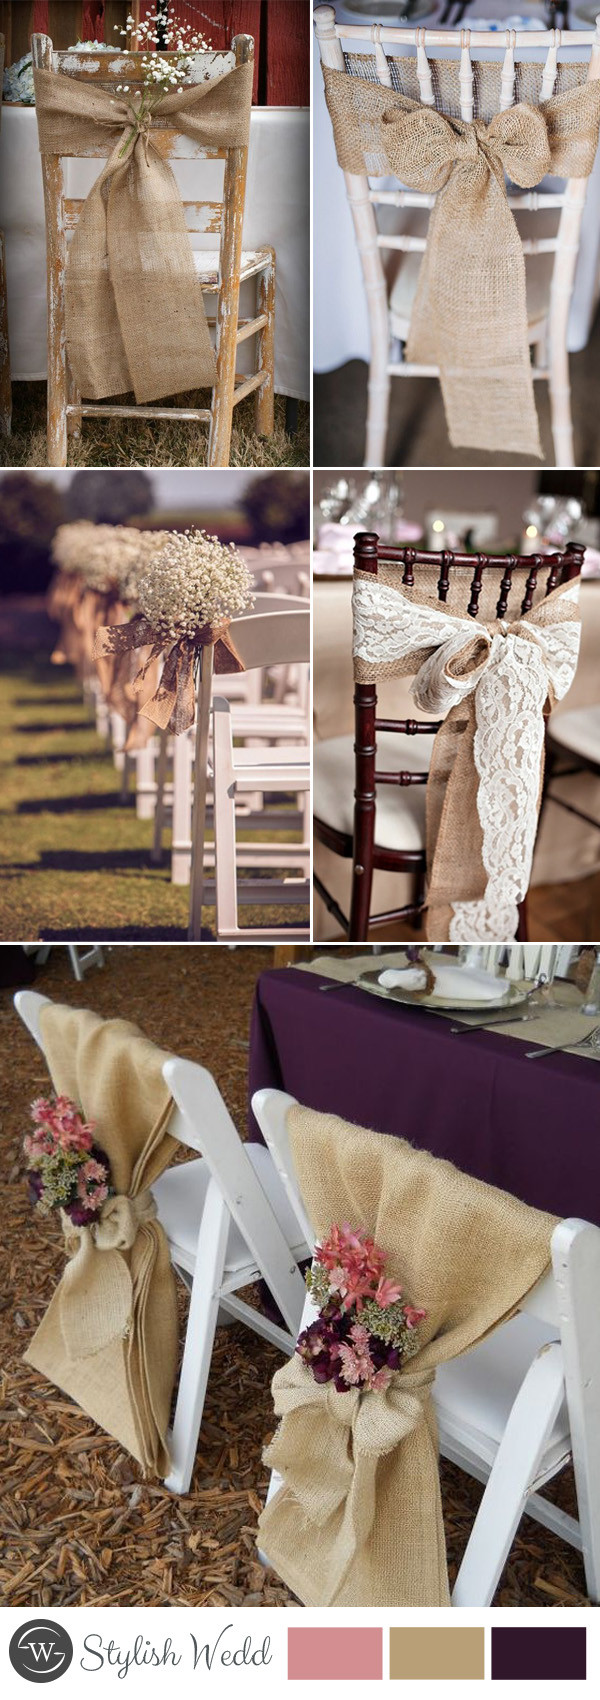 How To Decorate For A Wedding
 50 Great Ways to Decorate Your Weddding Chair – Stylish